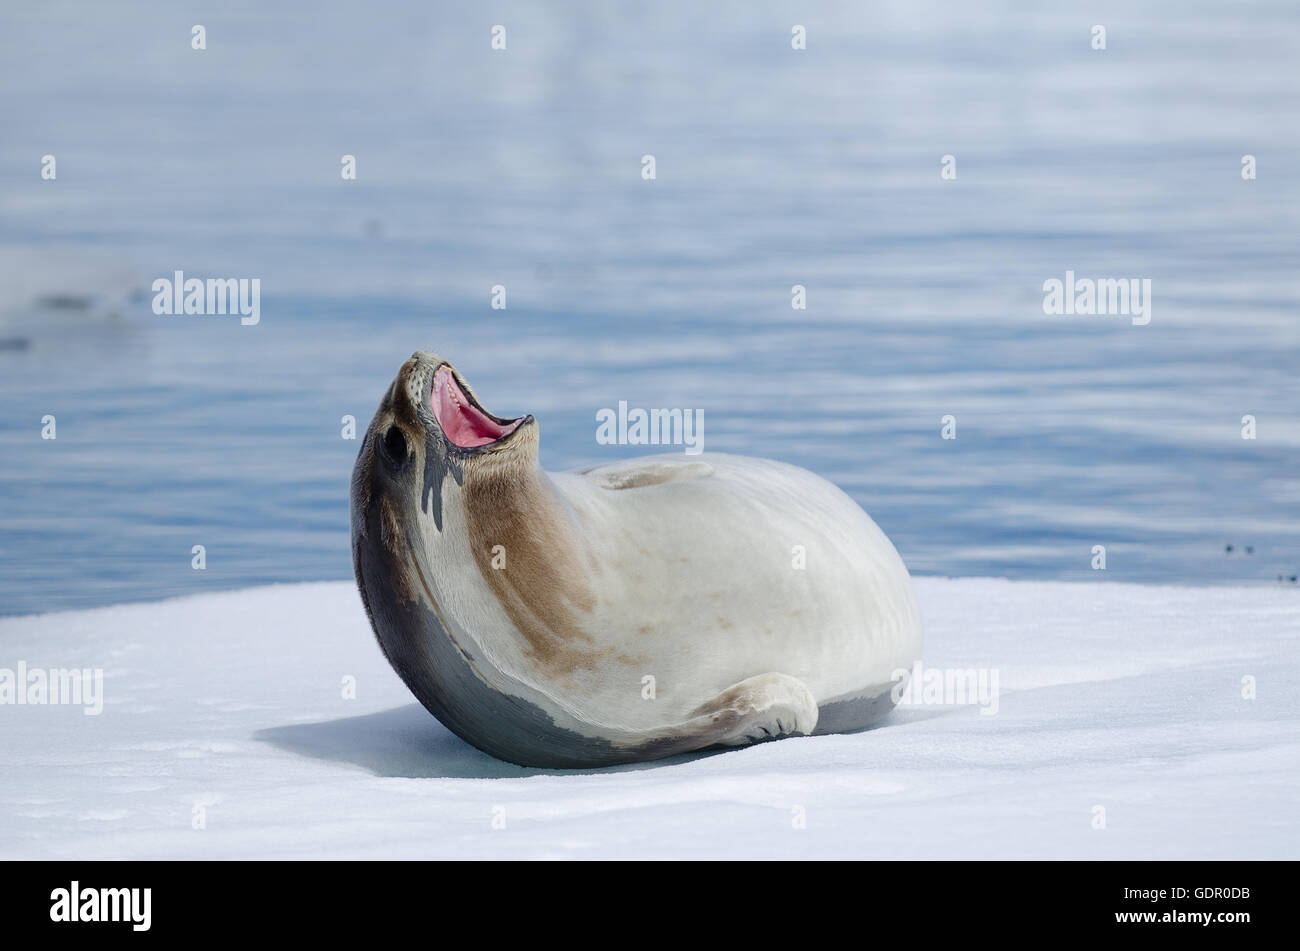 A Ross seal Ommatophoca rossii on an iceberg in Antarctica showing the streaky throat and small muzzy with big eyes Stock Photo